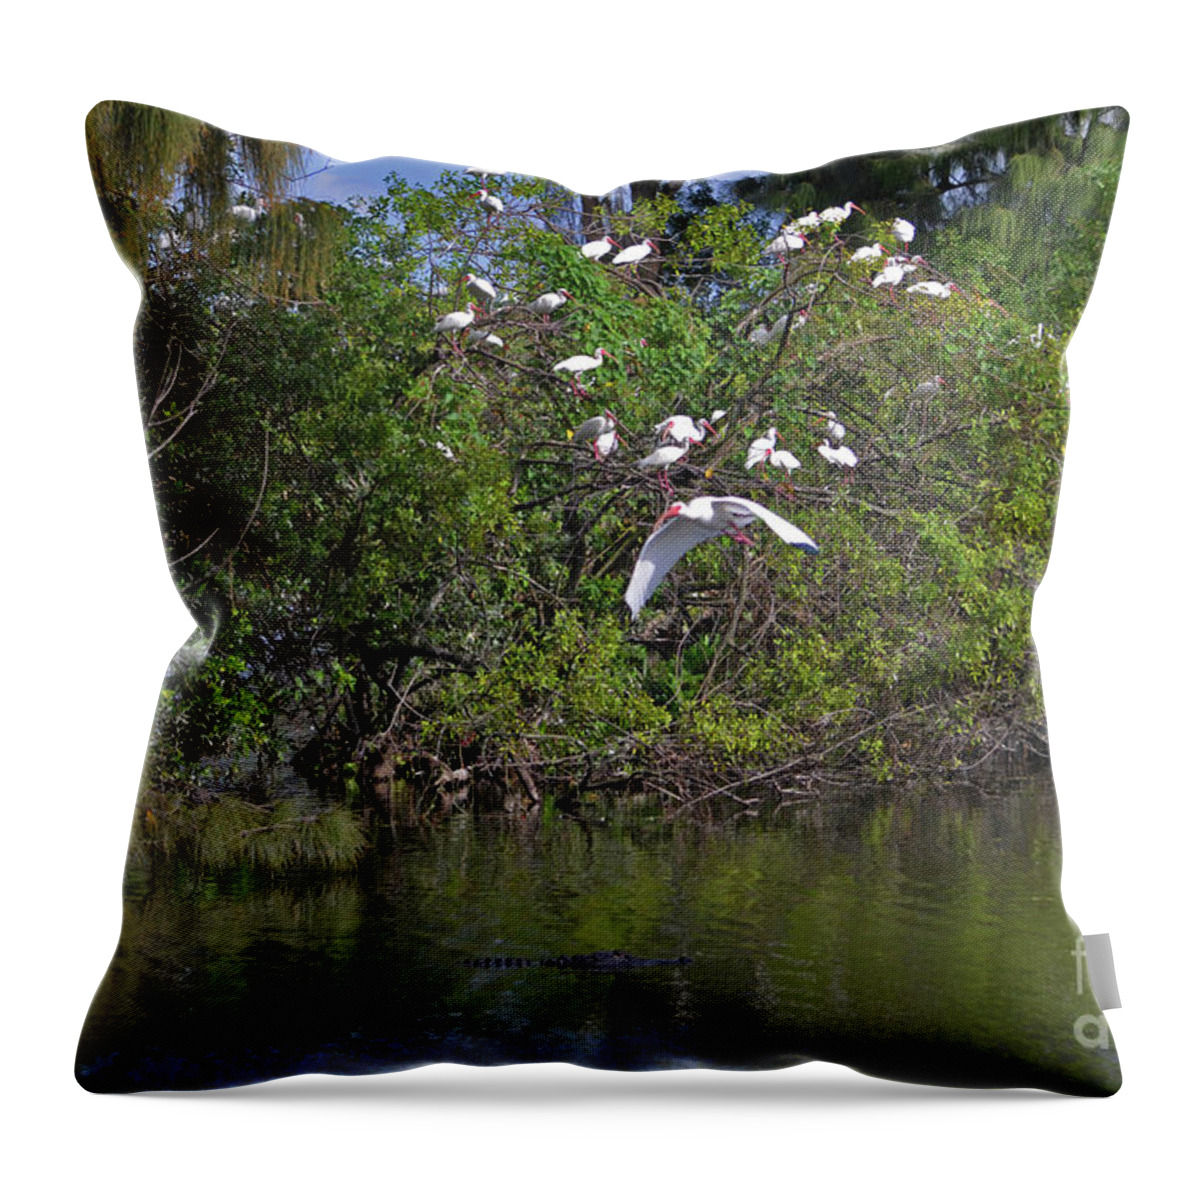  Ibis Throw Pillow featuring the photograph 38- Alligator and Ibis by Joseph Keane